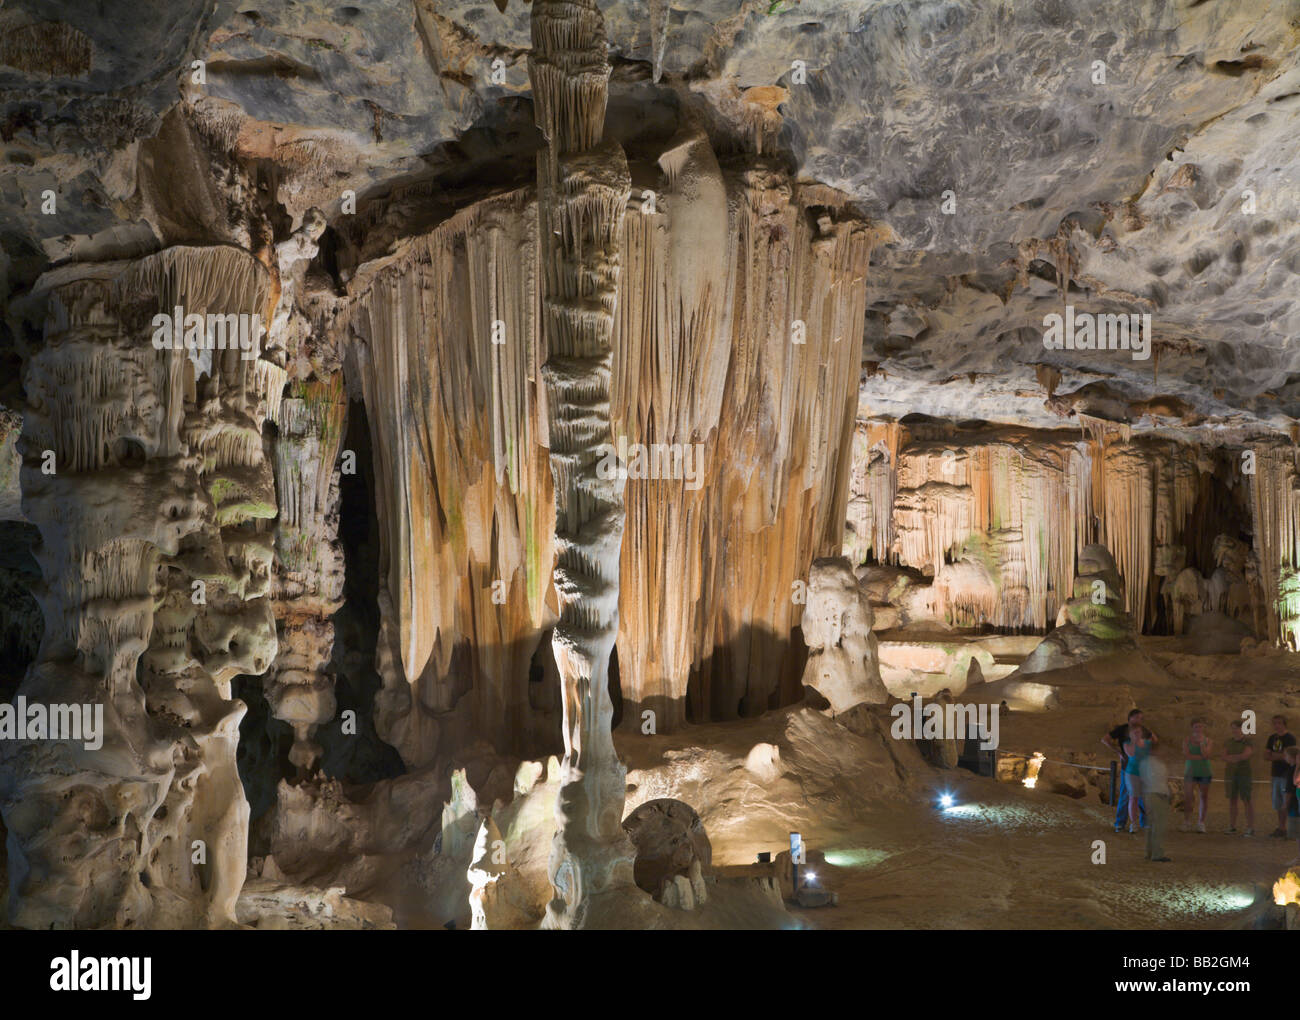 Inside Cango Caves, Oudtshoorn, 'South Africa' Stock Photo